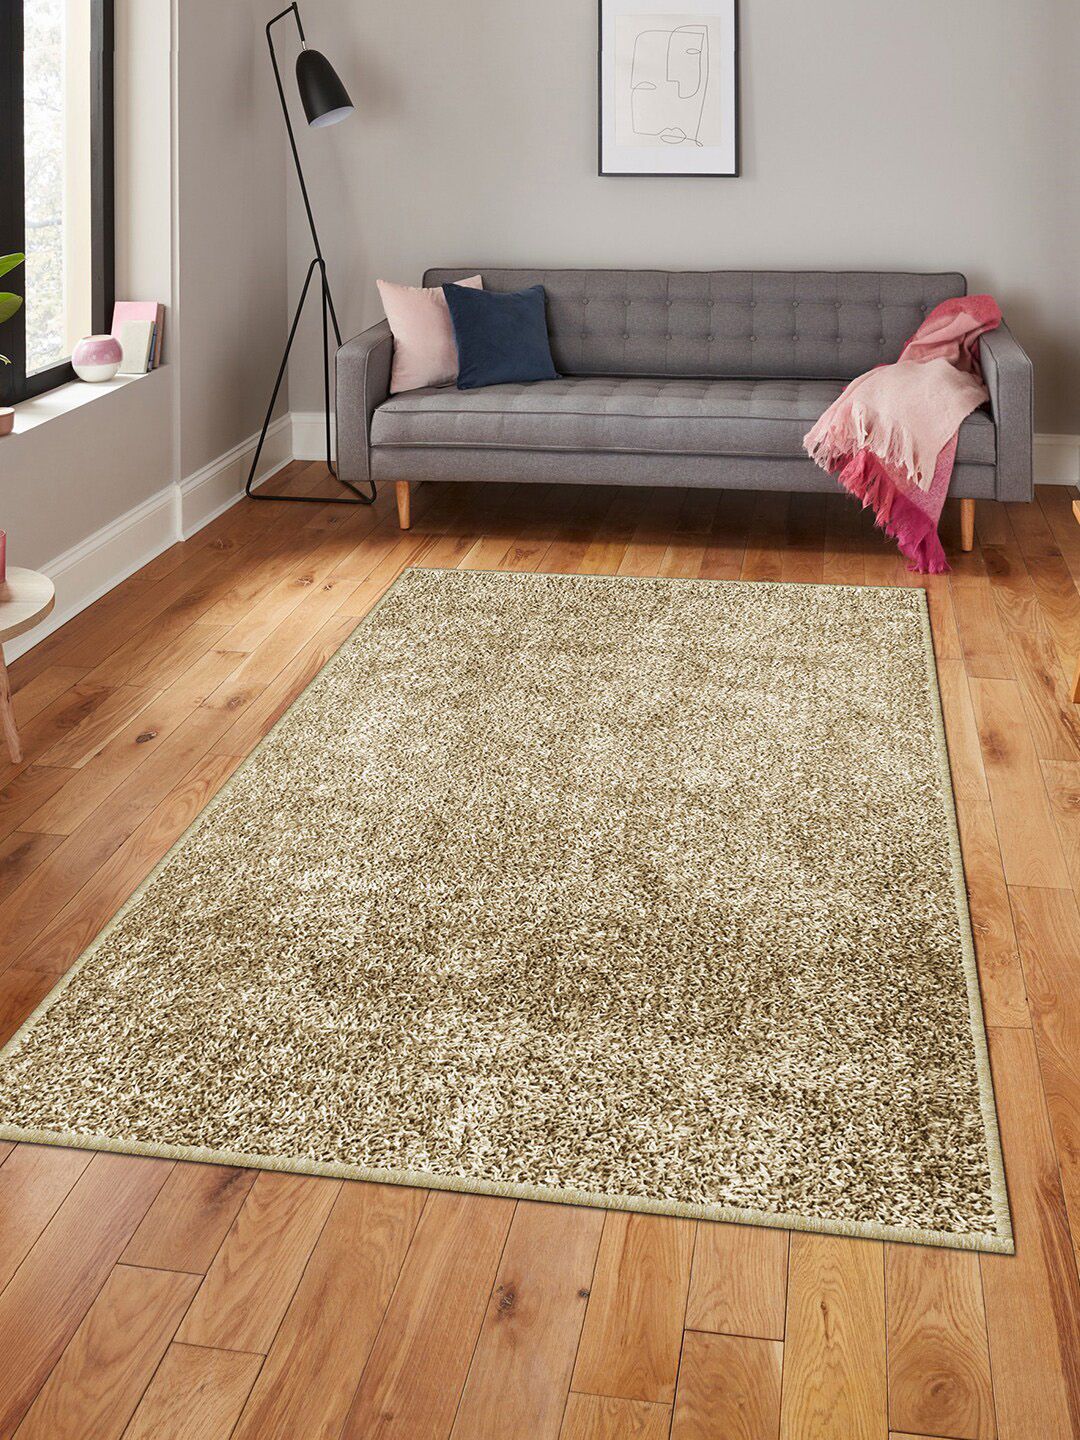 Story@home Beige Solid Polyester Anti Skid Carpet Price in India